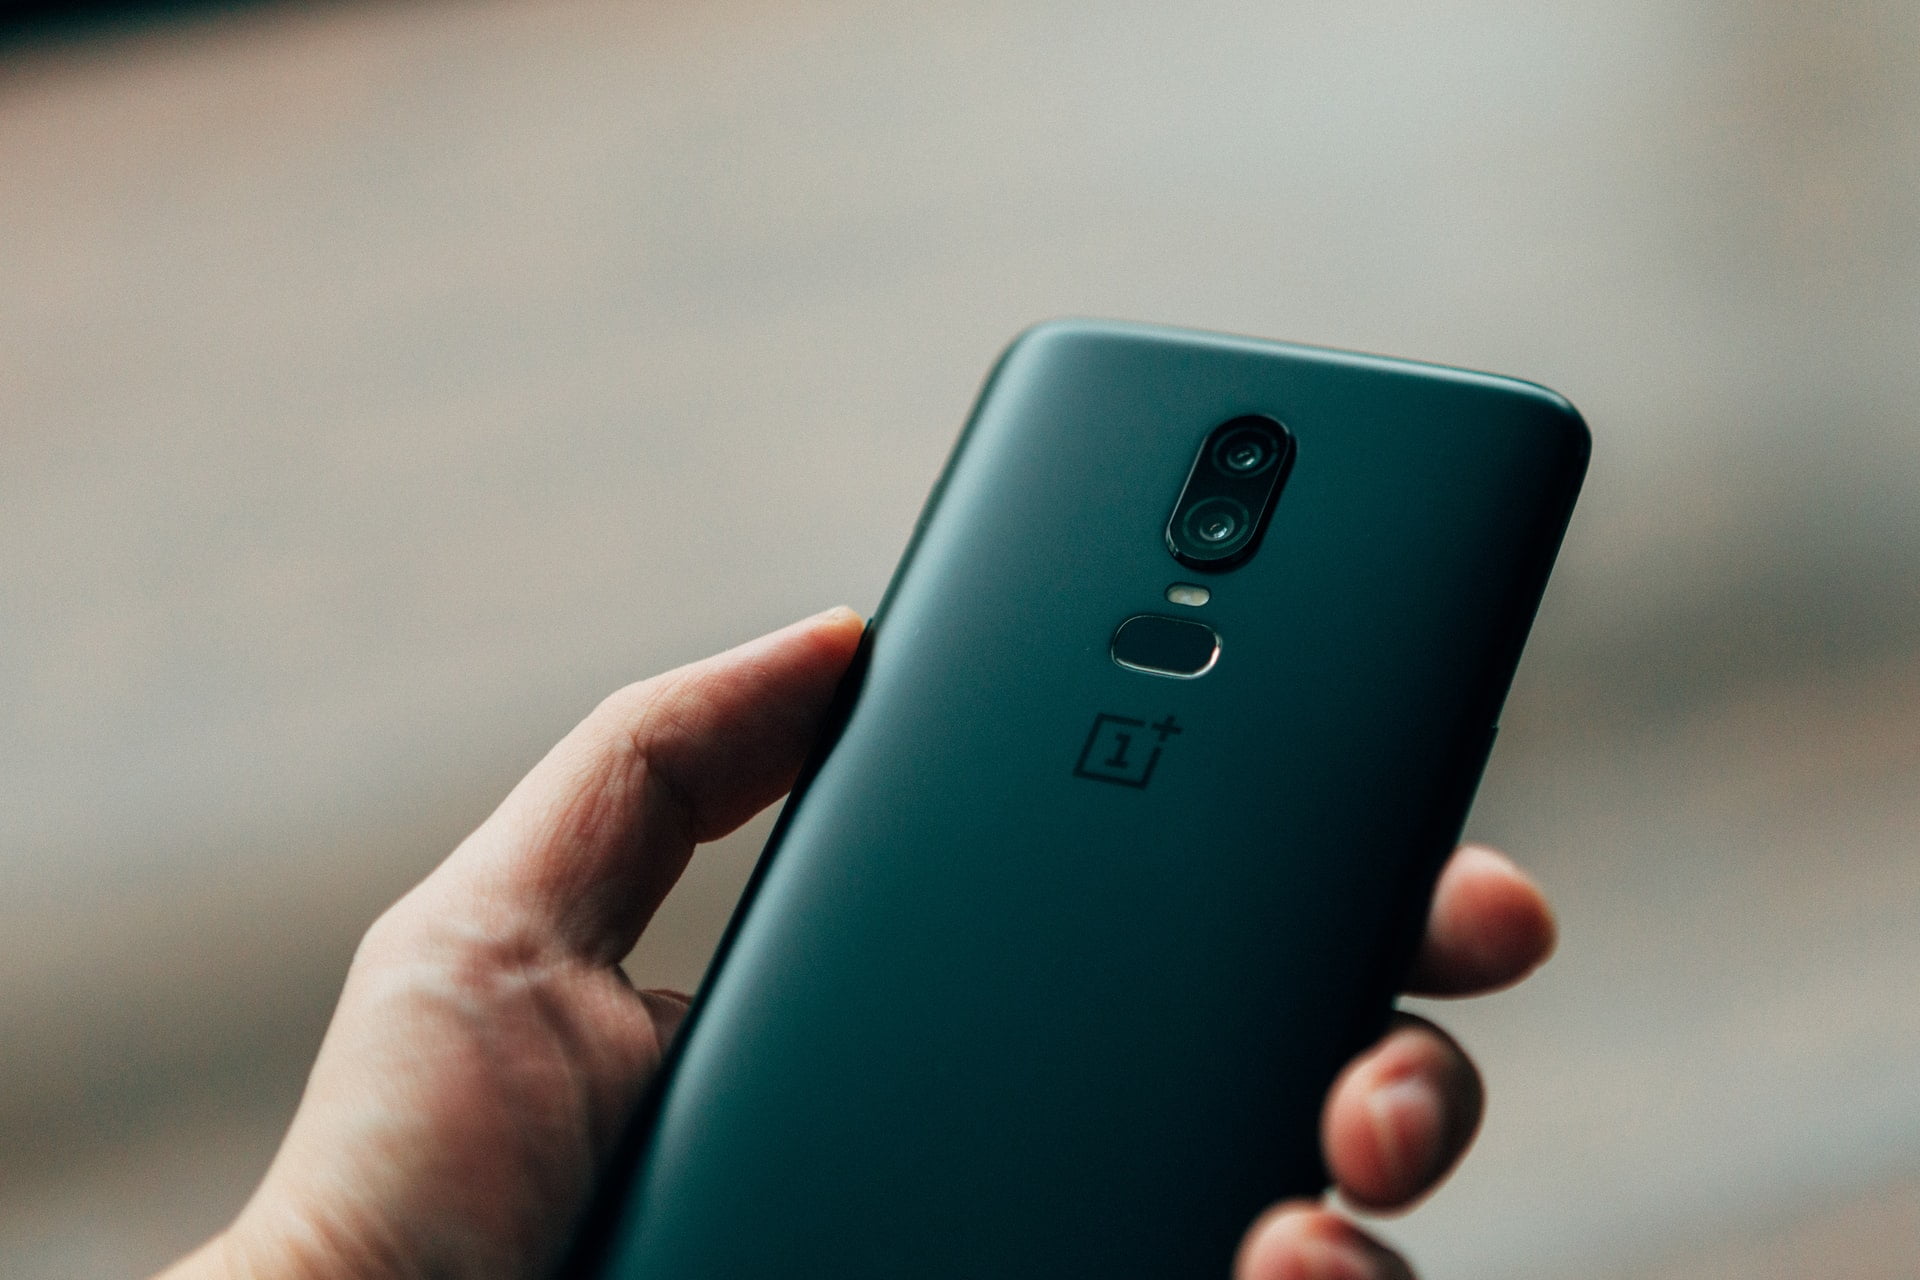 Oneplus 6, 6T Are Finally Getting A Stable Android 11 Update